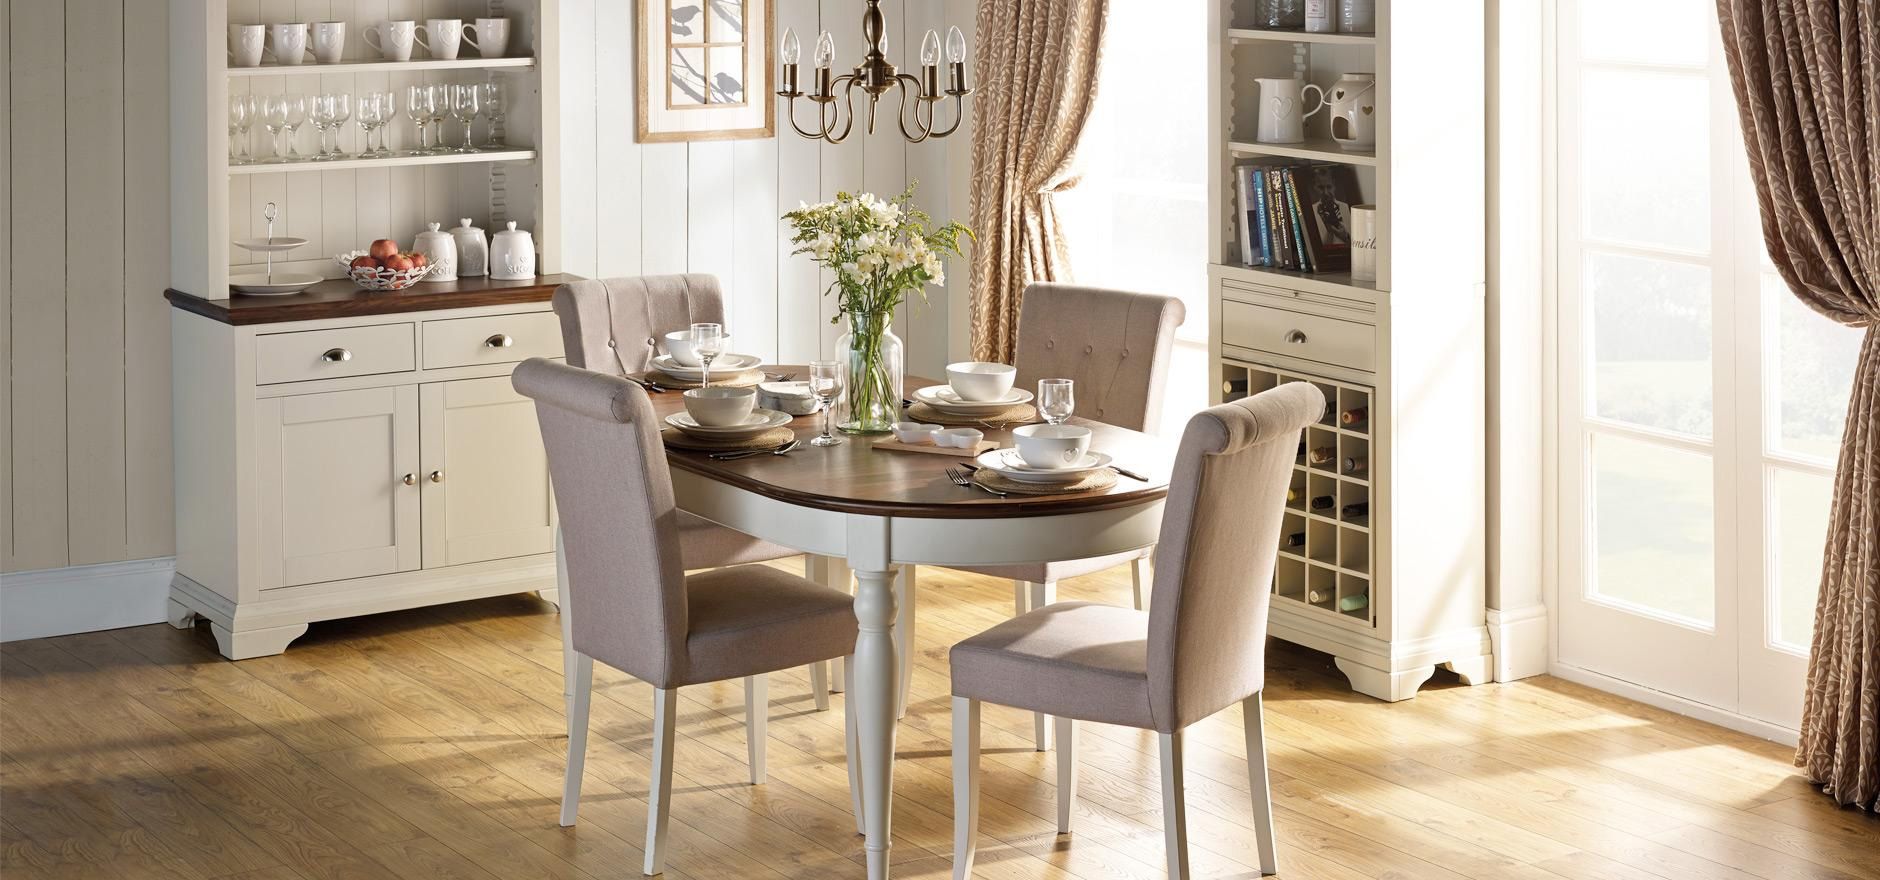 dunelm dining room chairs